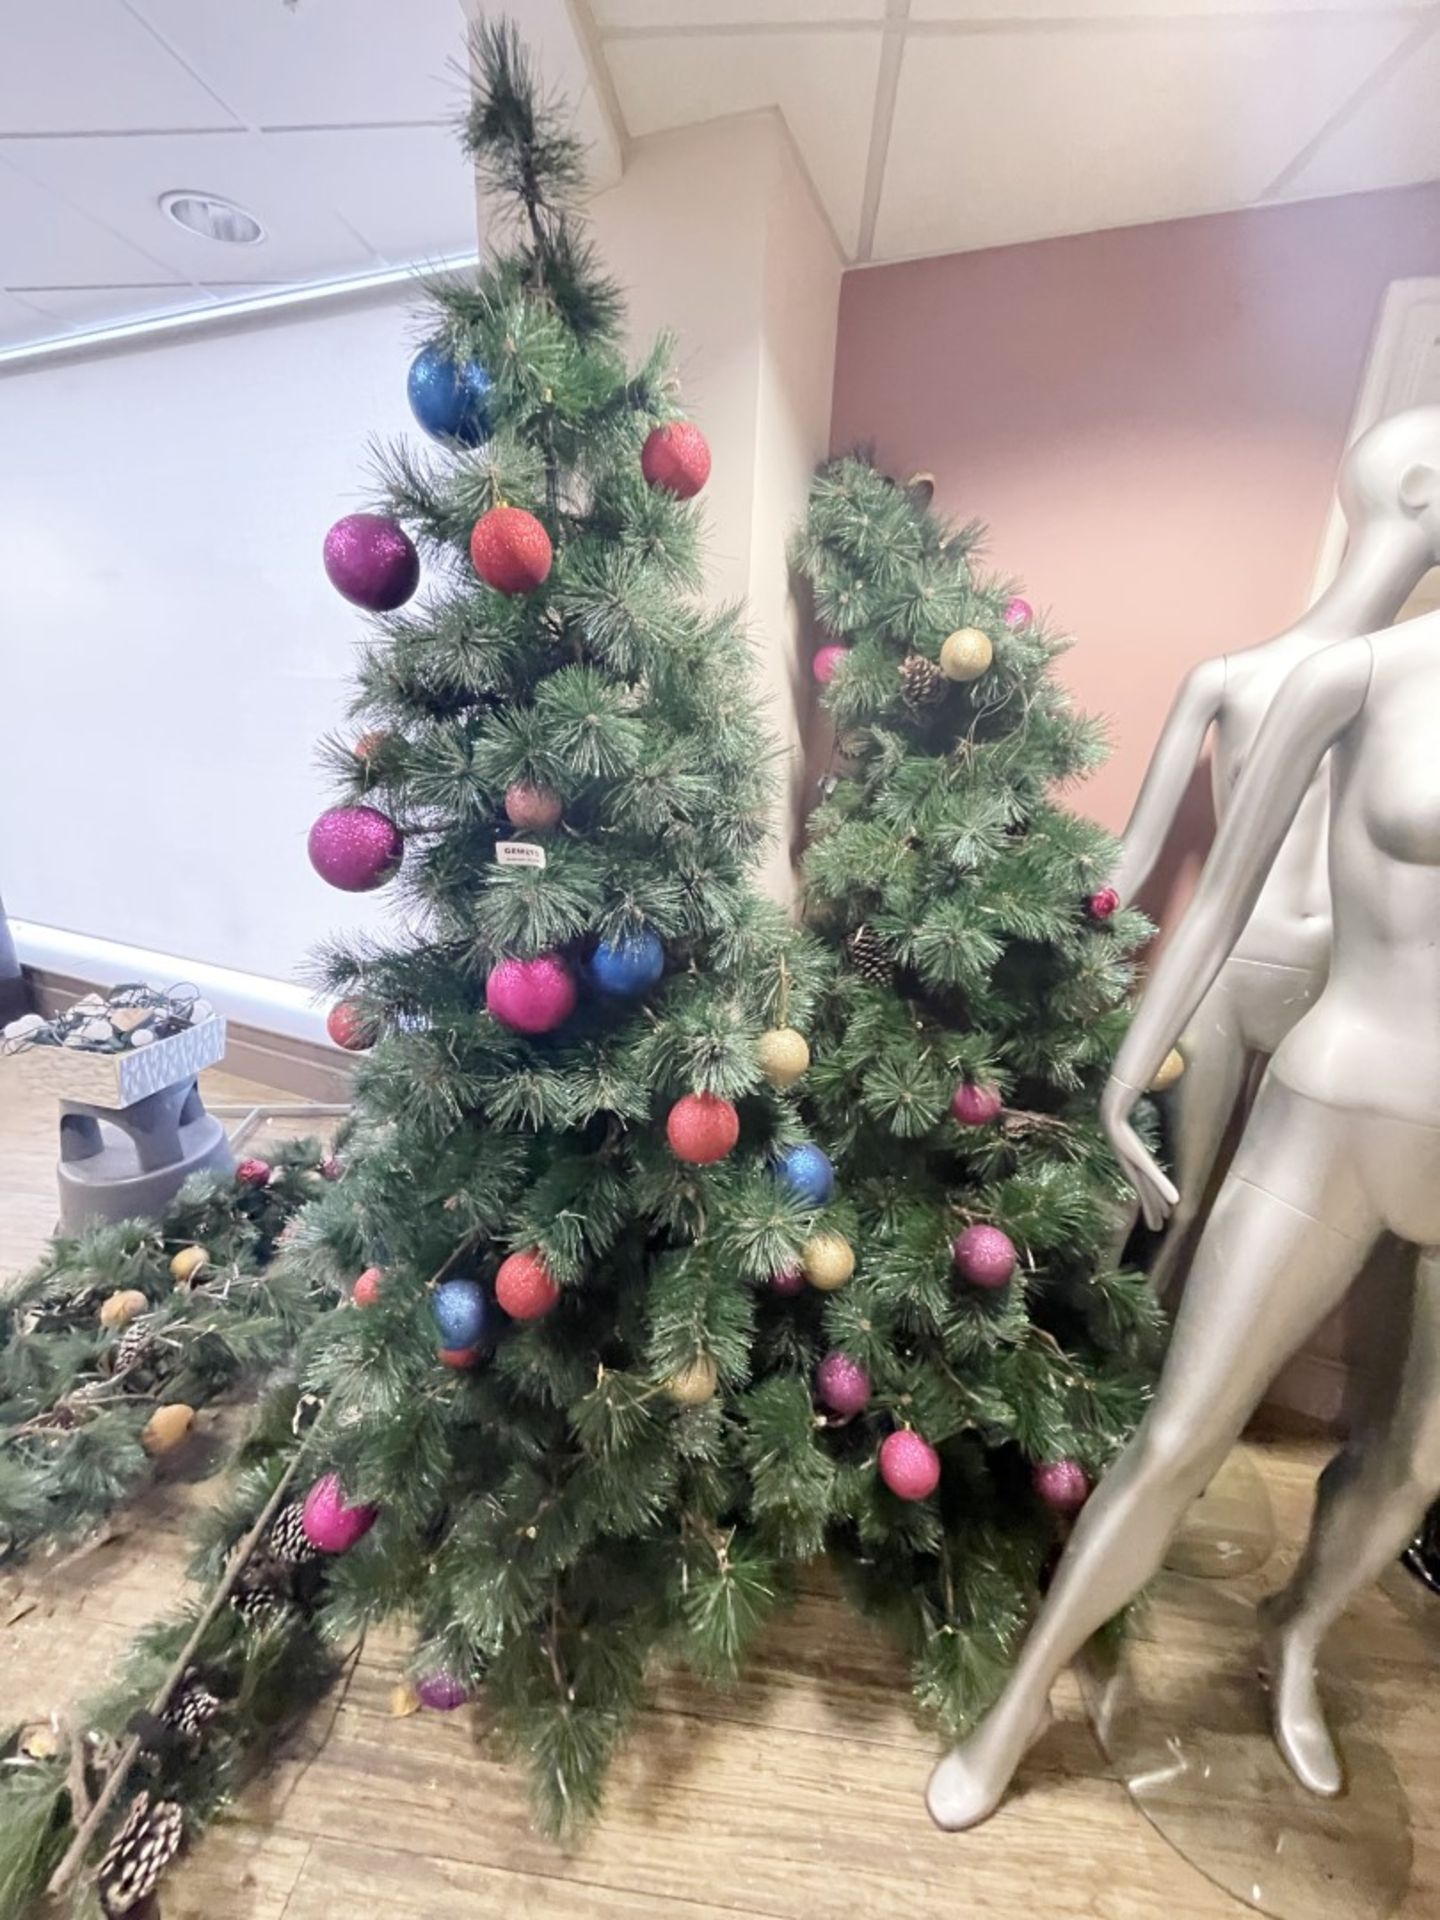 1 x Christmas Tree With Assorted Decorations - CL670 - Ref: GEM213 - Location: Gravesend, DA11 - Image 3 of 10